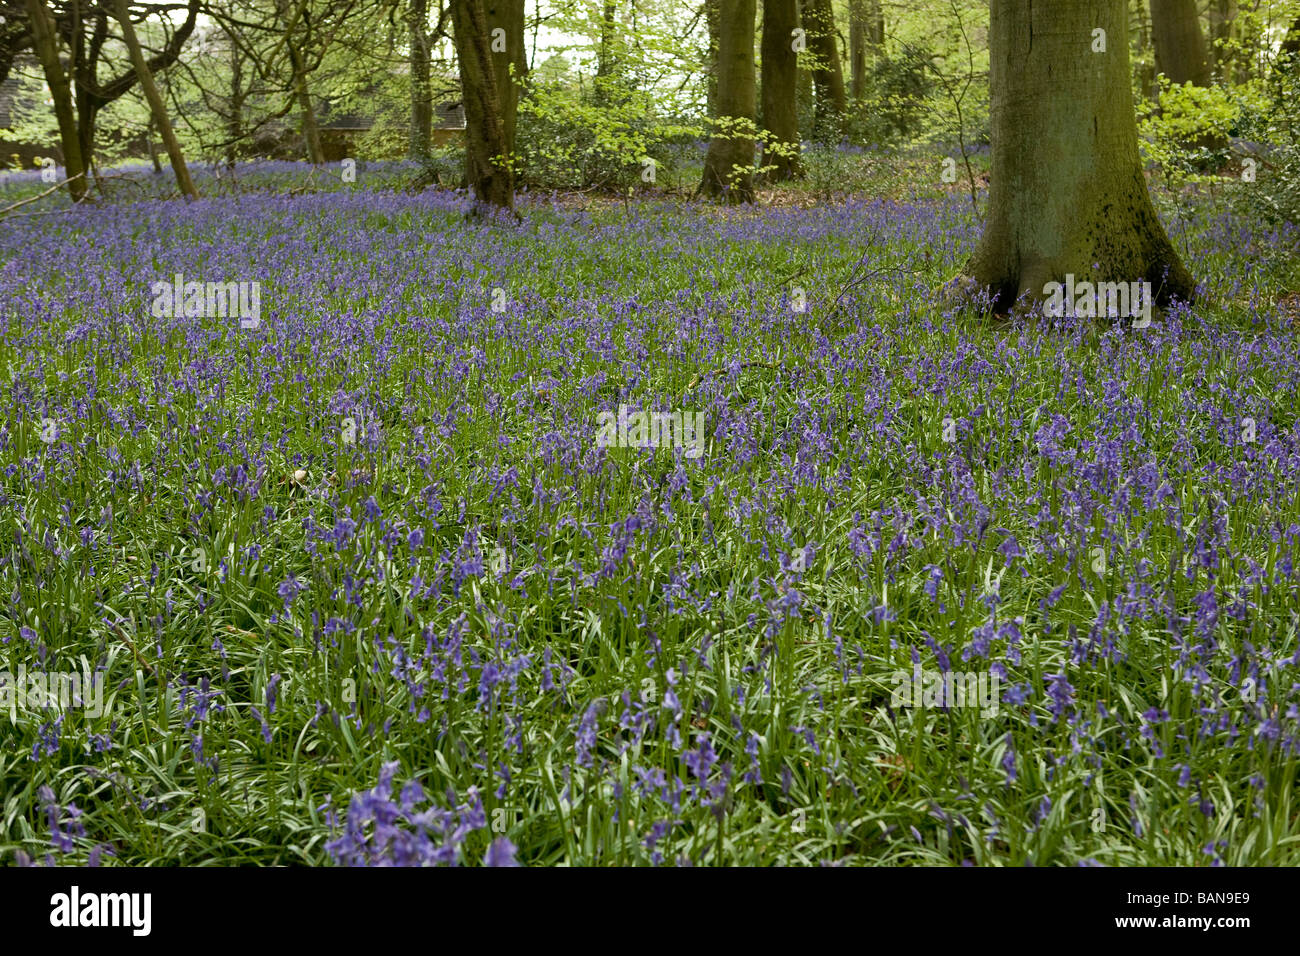 carpet of bluebells in Oxfordshire woodland in the Chilterns Stock Photo